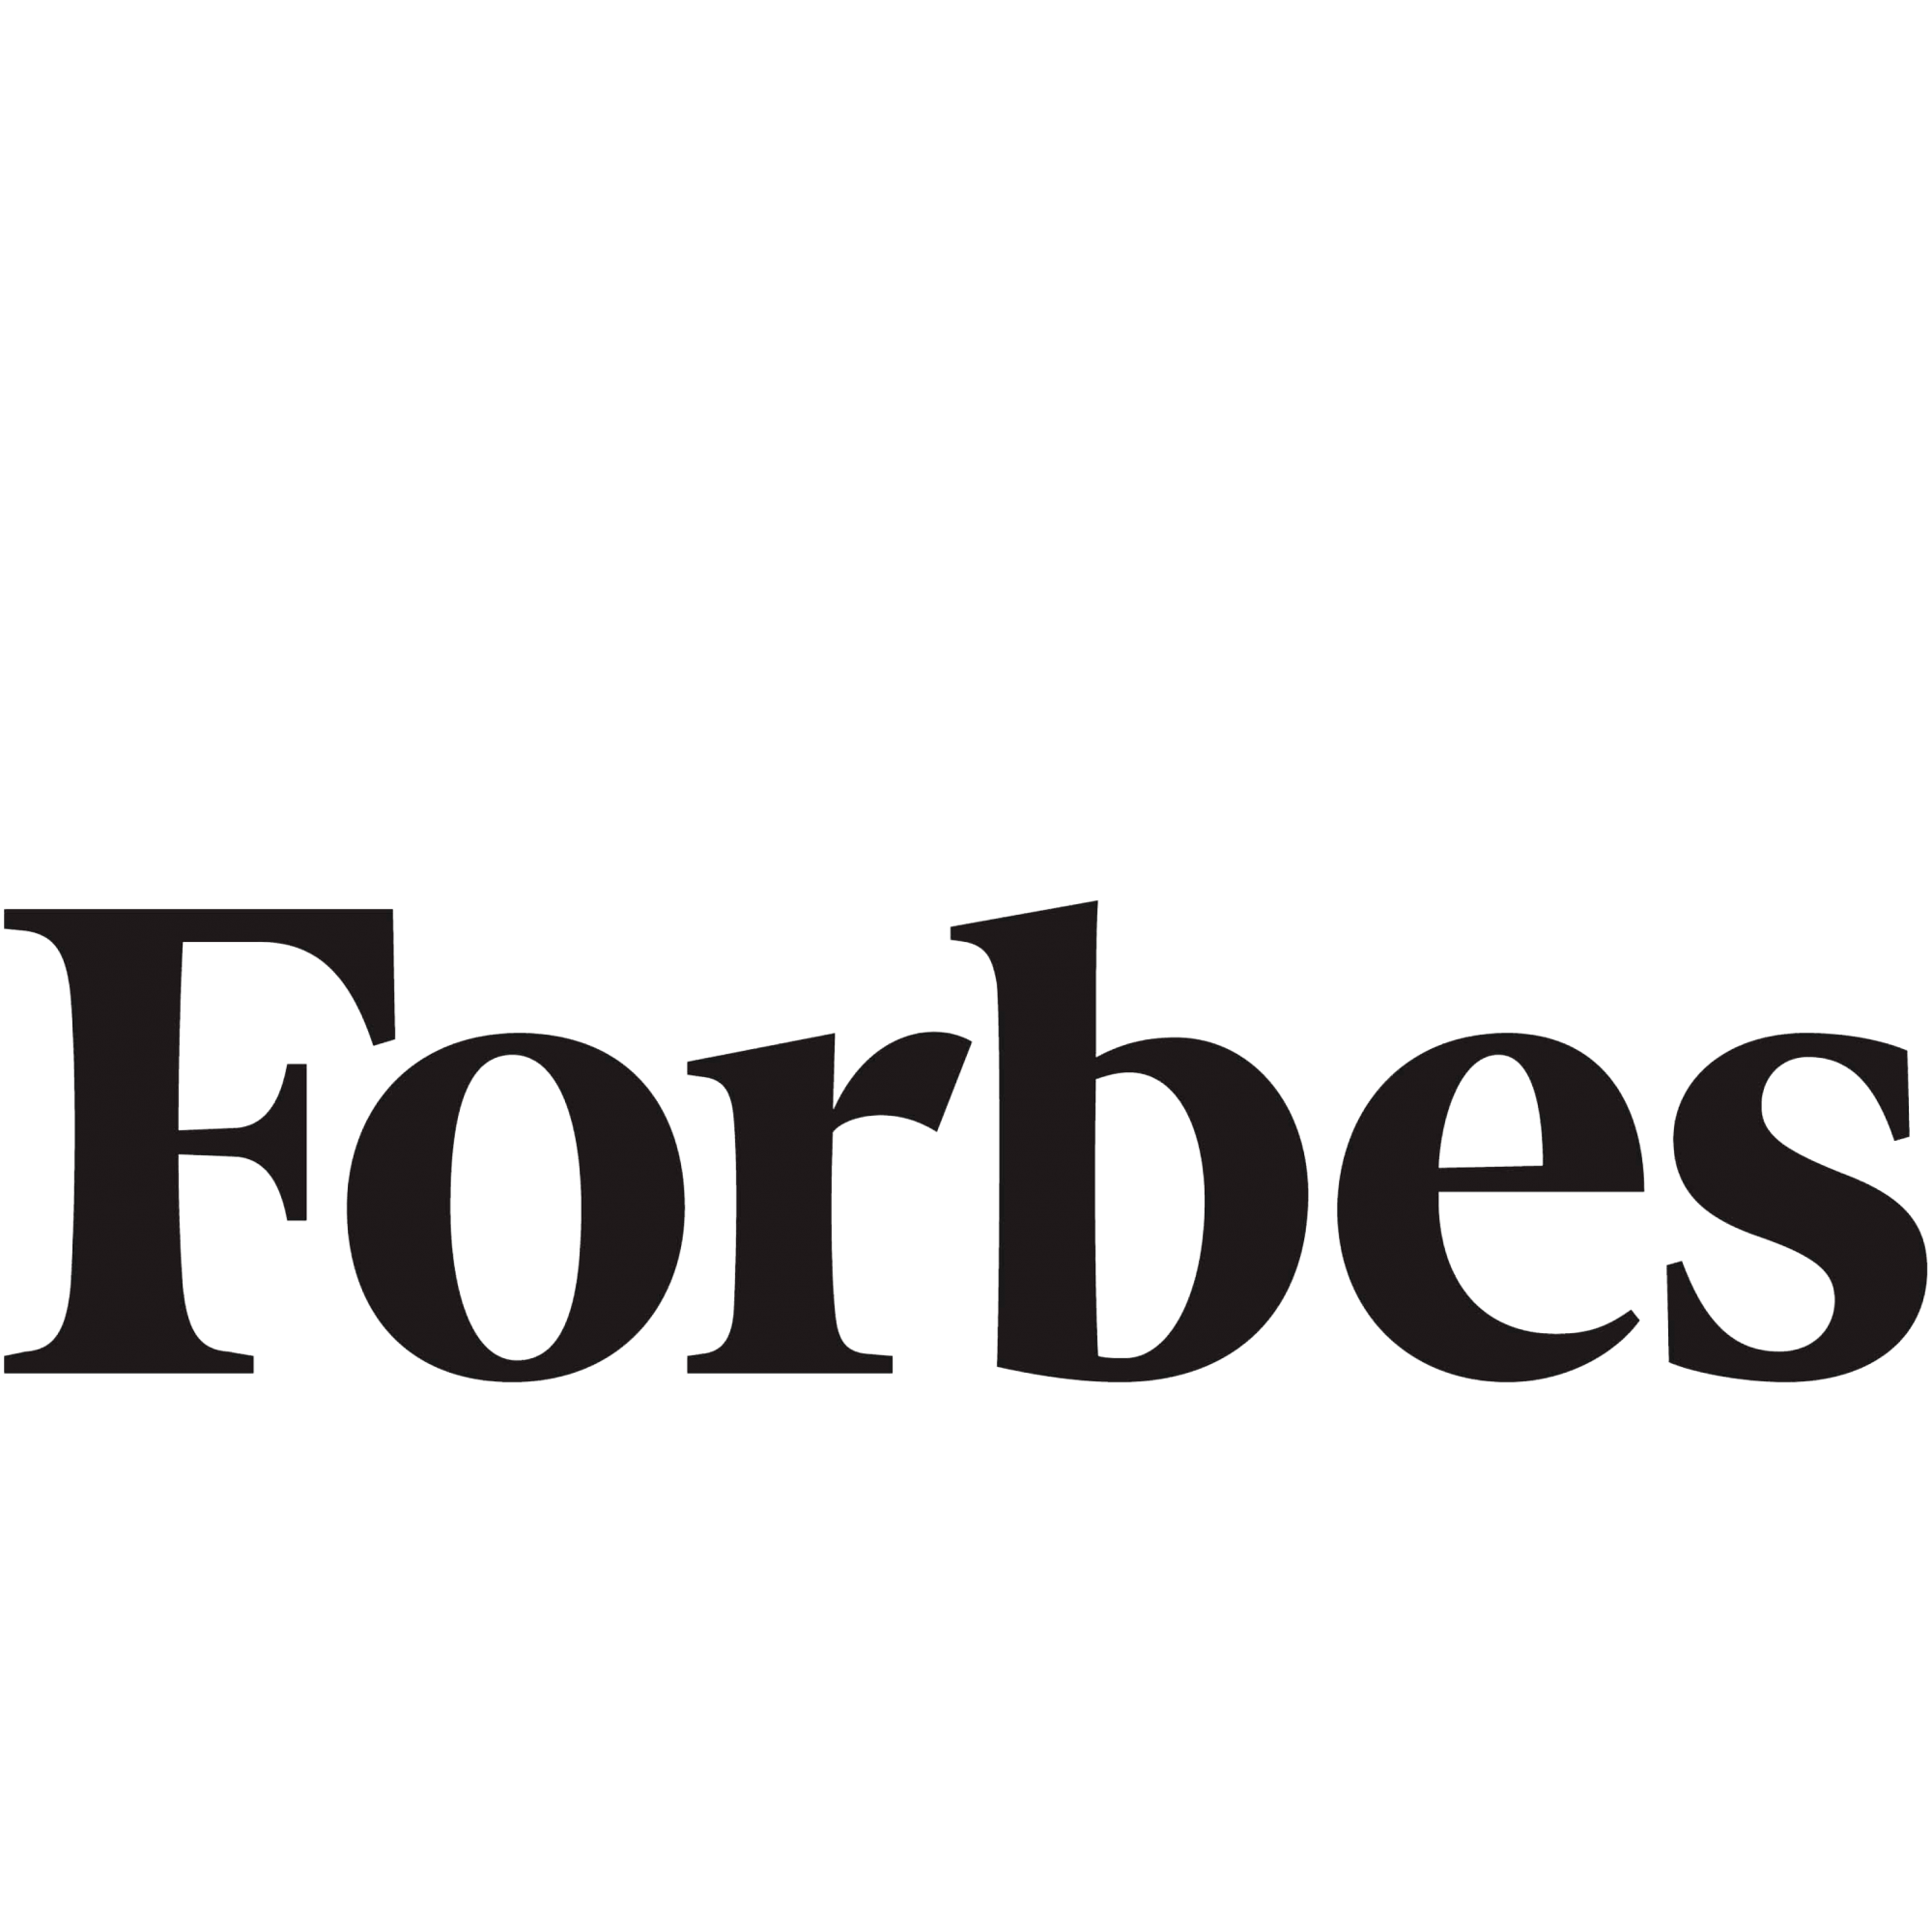 The Forbes logo in classic black text, set against a transparent background, adds a touch of elegance to any home office décor.